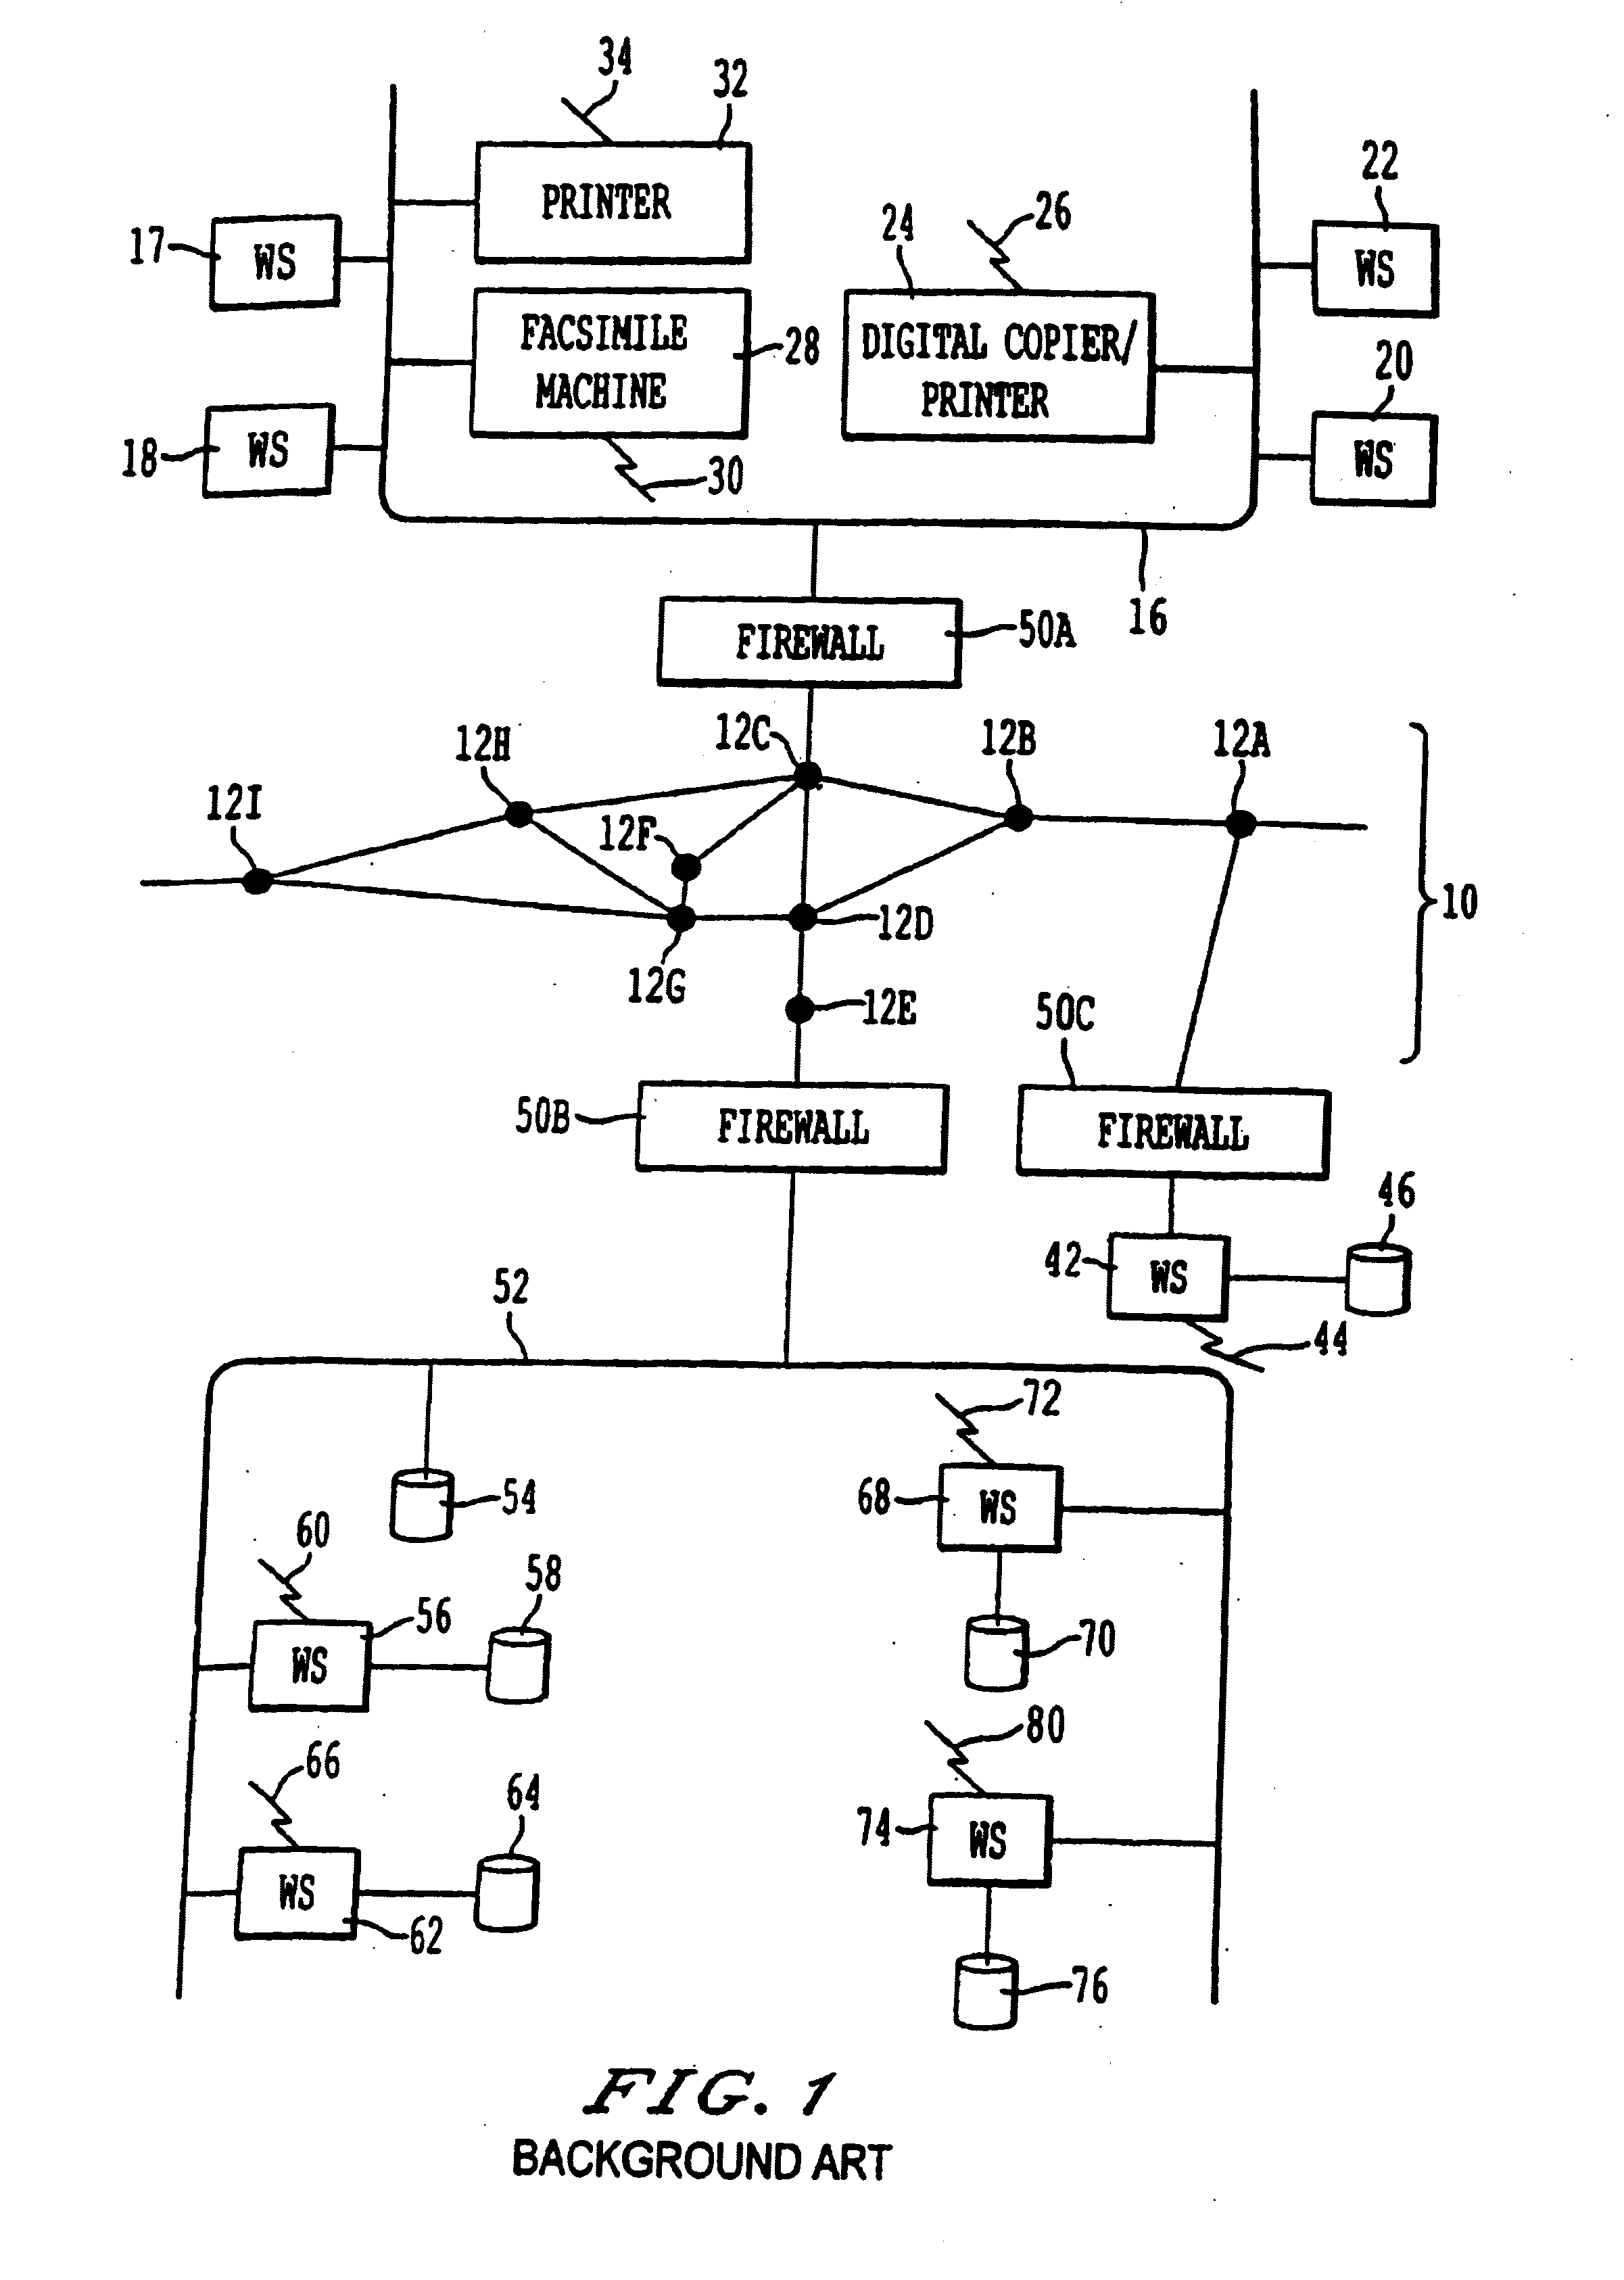 Method and system of remote diagnostic, control and information collection using a dynamic linked library of multiple formats and multiple protocols with intelligent protocol processor